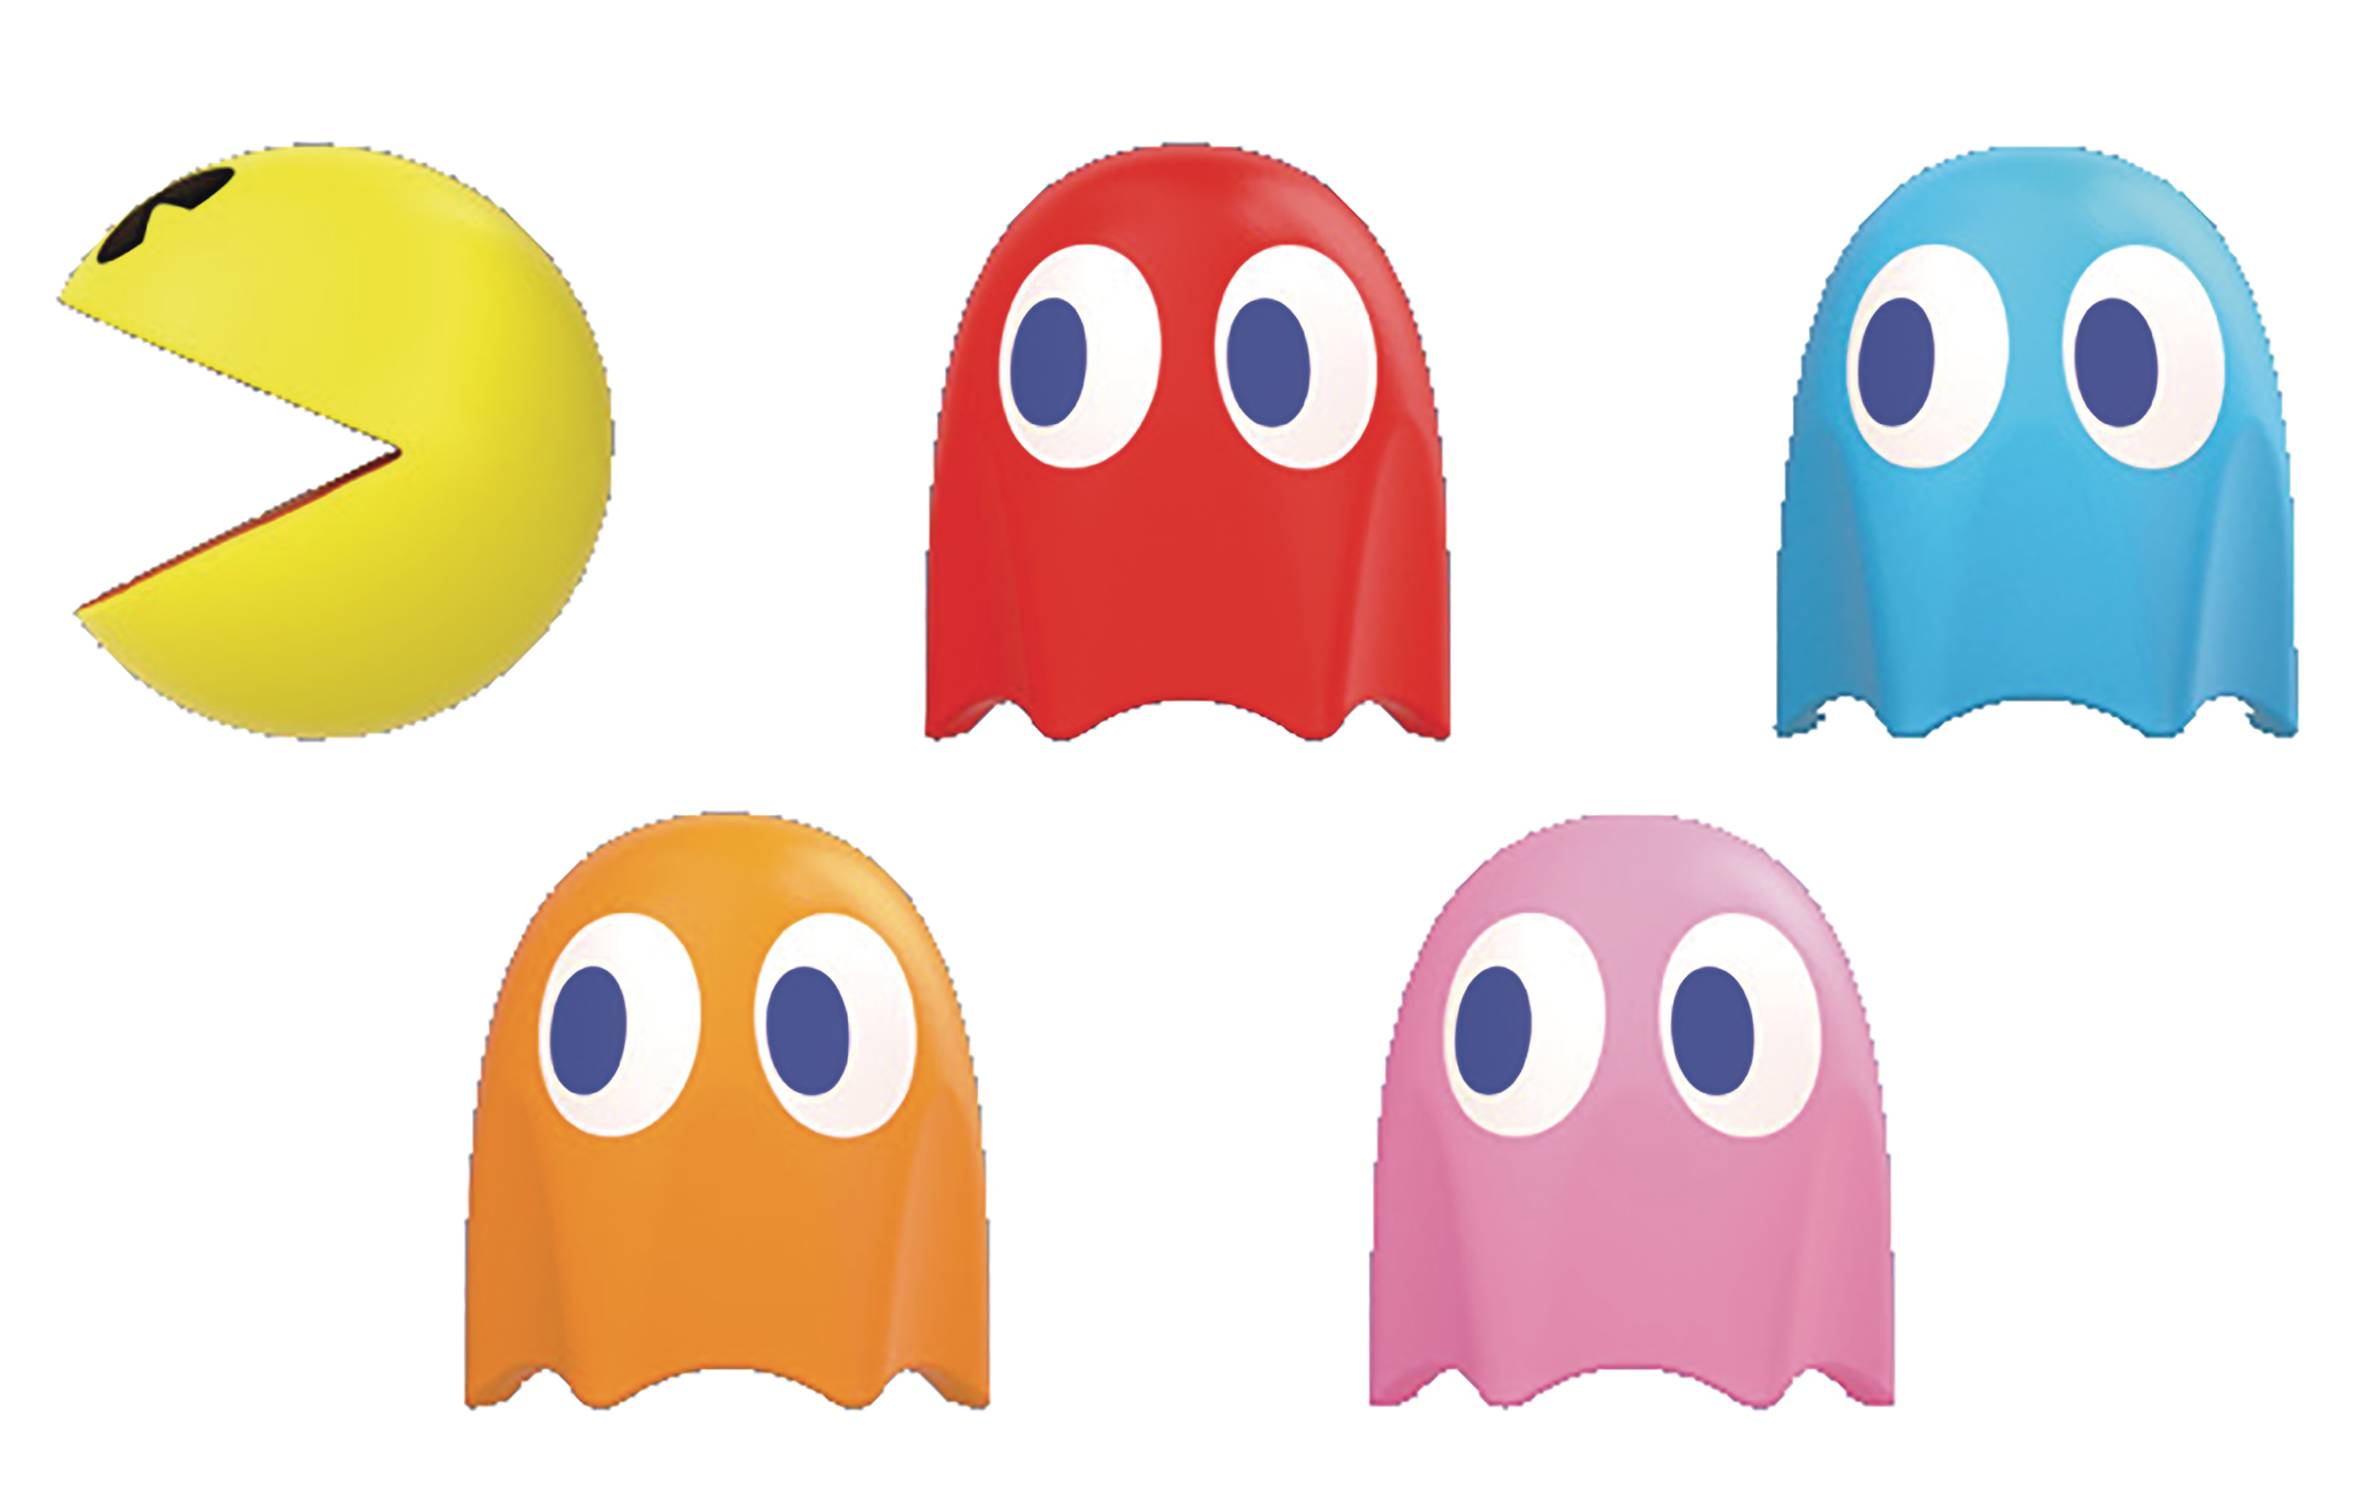 PAC-MAN characters now are now cable mascots; affix them to your USB cables...